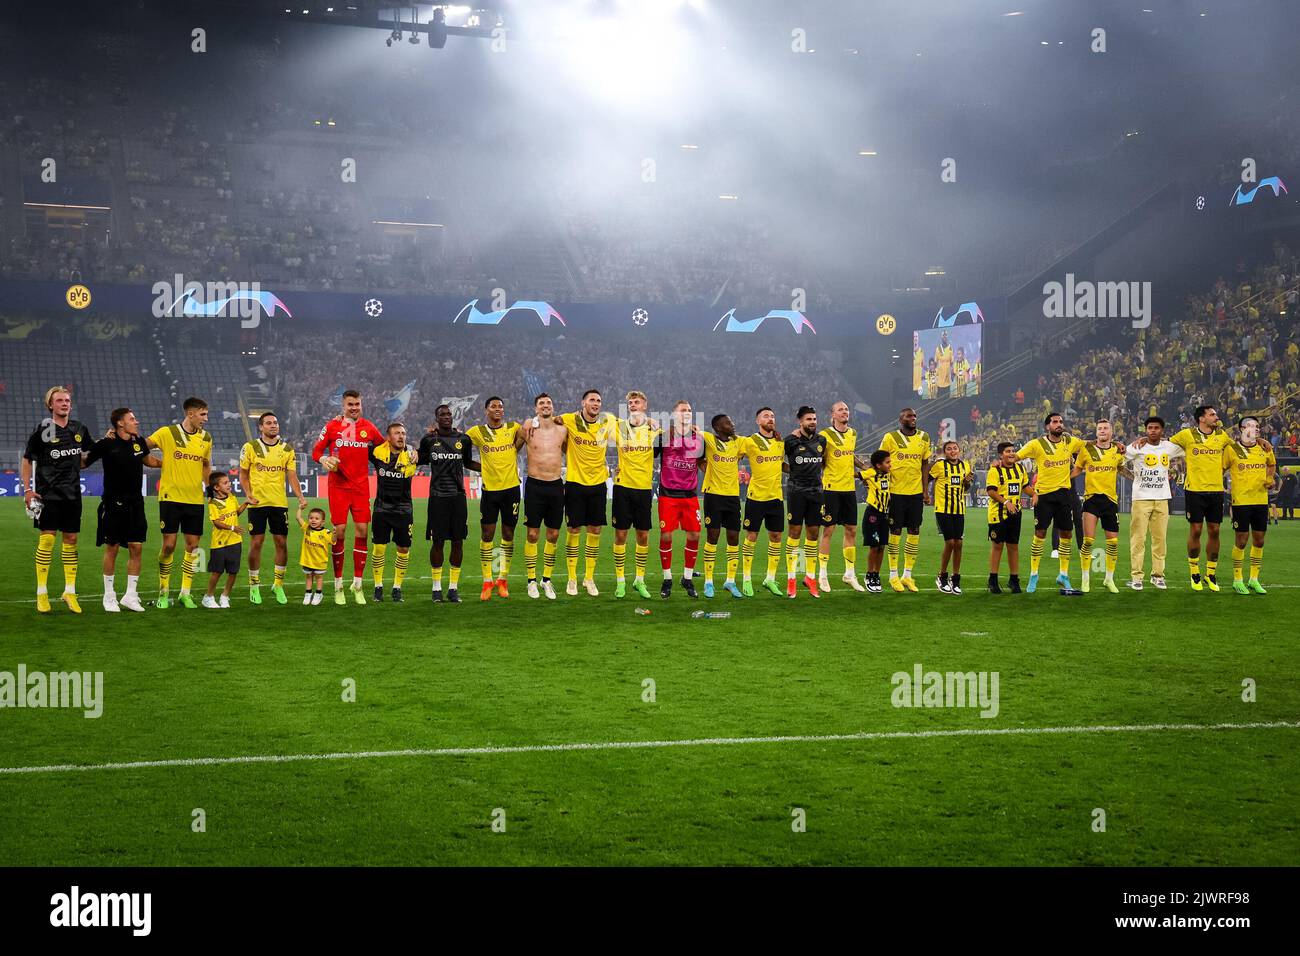 DORTMUND, GERMANY - SEPTEMBER 6: Giovanni Reyna of Borussia Dortmund, Mats Hummels of Borussia Dortmund, Emre Can, Antonios Papadopoulos, Alexander Meyer of Borussia Dortmund, Thomas Meunier of Borussia Dortmund, Niklas Sule of Borussia Dortmund, Nico Schlotterbeck of Borussia Dortmund, Raphael Guerreiro of Borussia Dortmund, Jude Bellingham of Borussia Dortmund, Salih Ozcan of Borussia Dortmund, Julian Brandt of Borussia Dortmund, Marco Reus of Borussia Dortmund, Thorgan Hazard of Borussia Dortmund and Anthony Modeste of Borussia Dortmund during the UEFA Champions League Group G match between Stock Photo